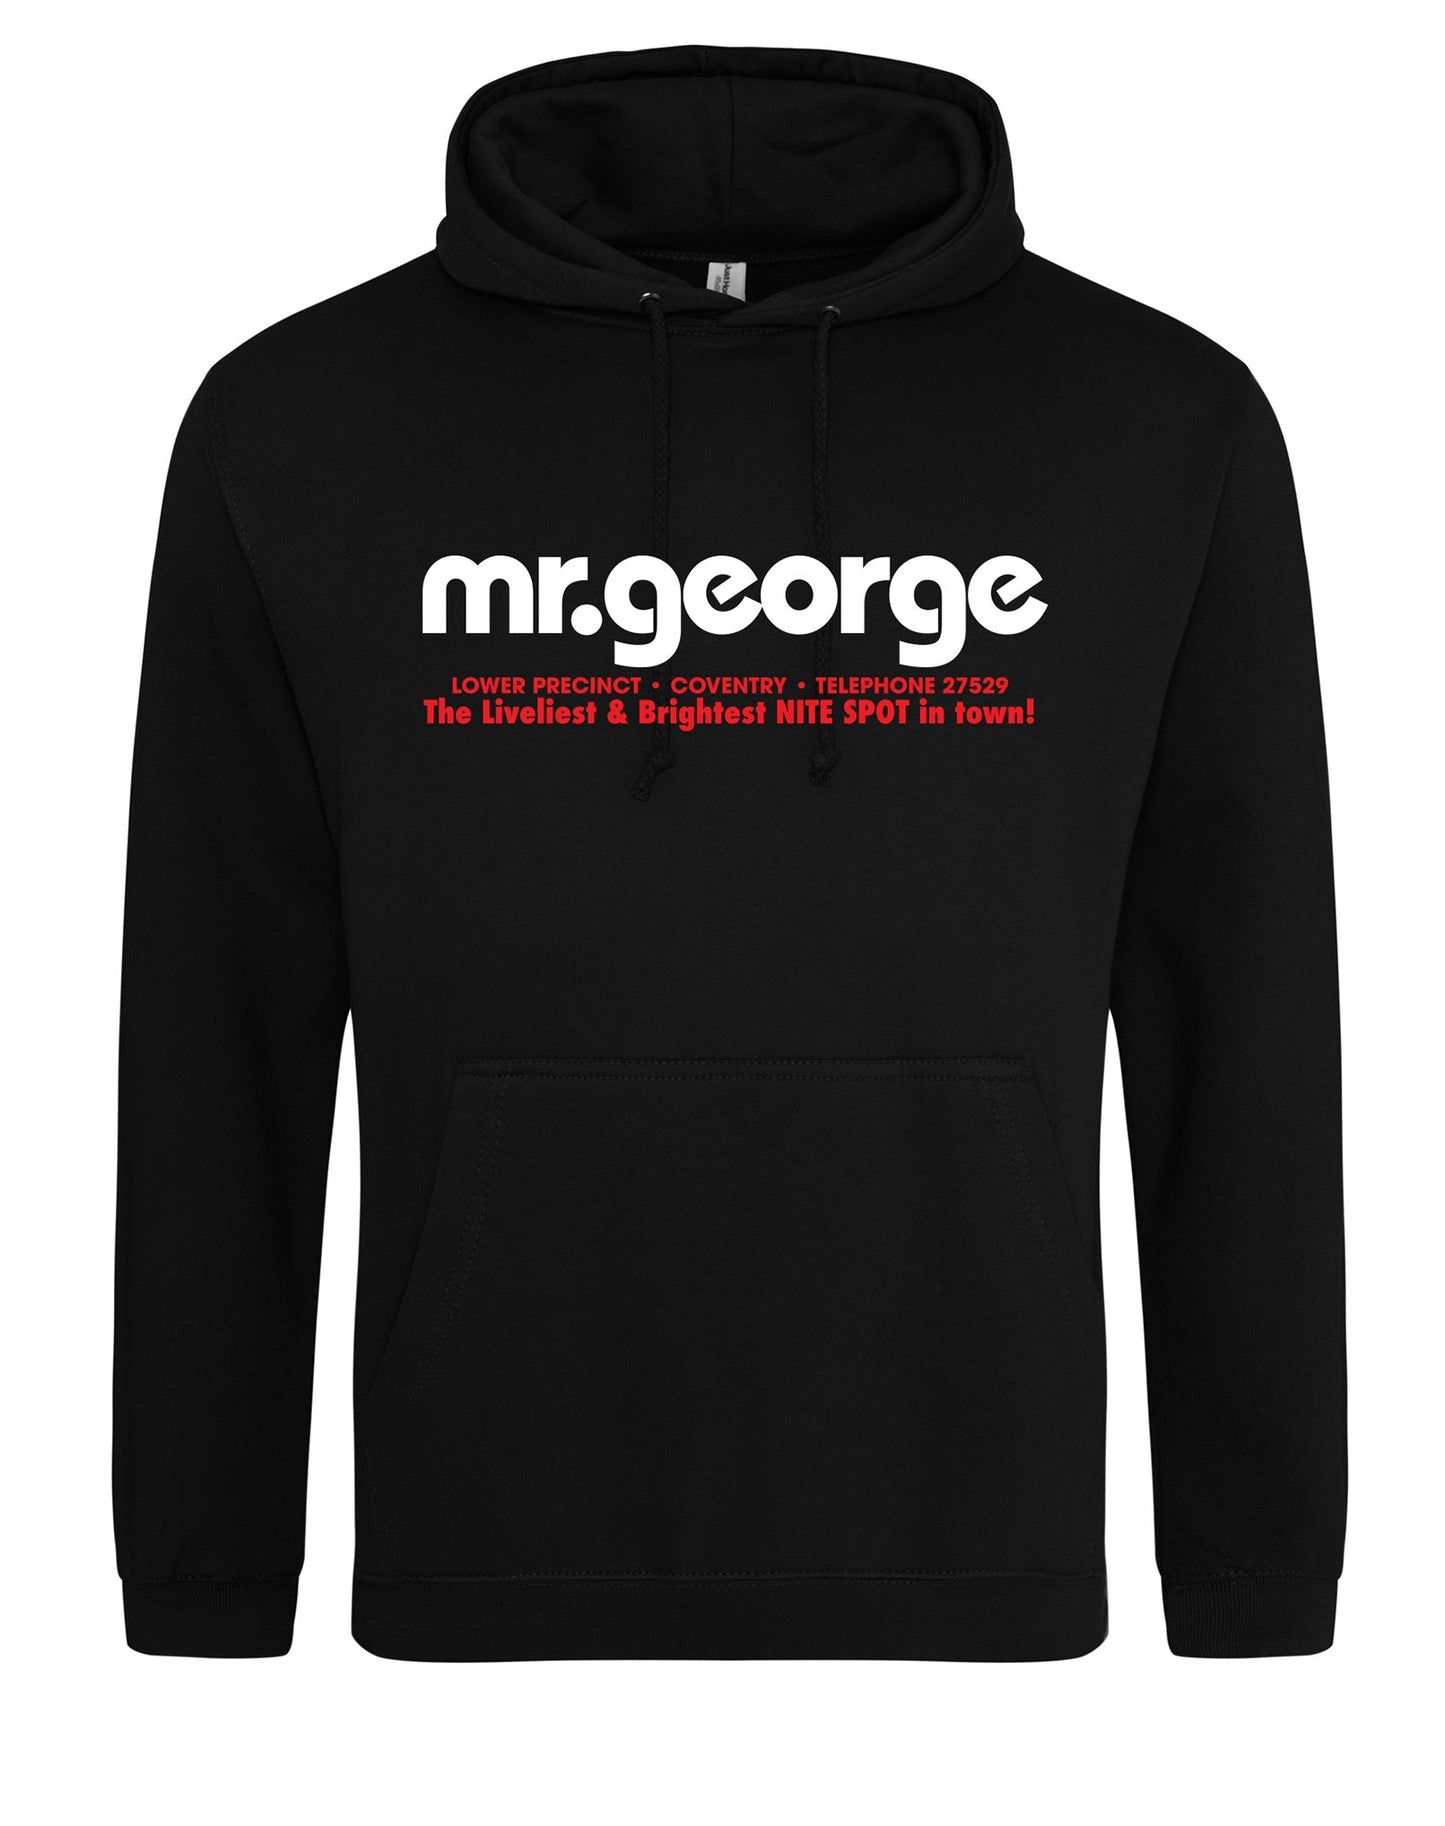 Mr George unisex fit hoodie - various colours - Dirty Stop Outs